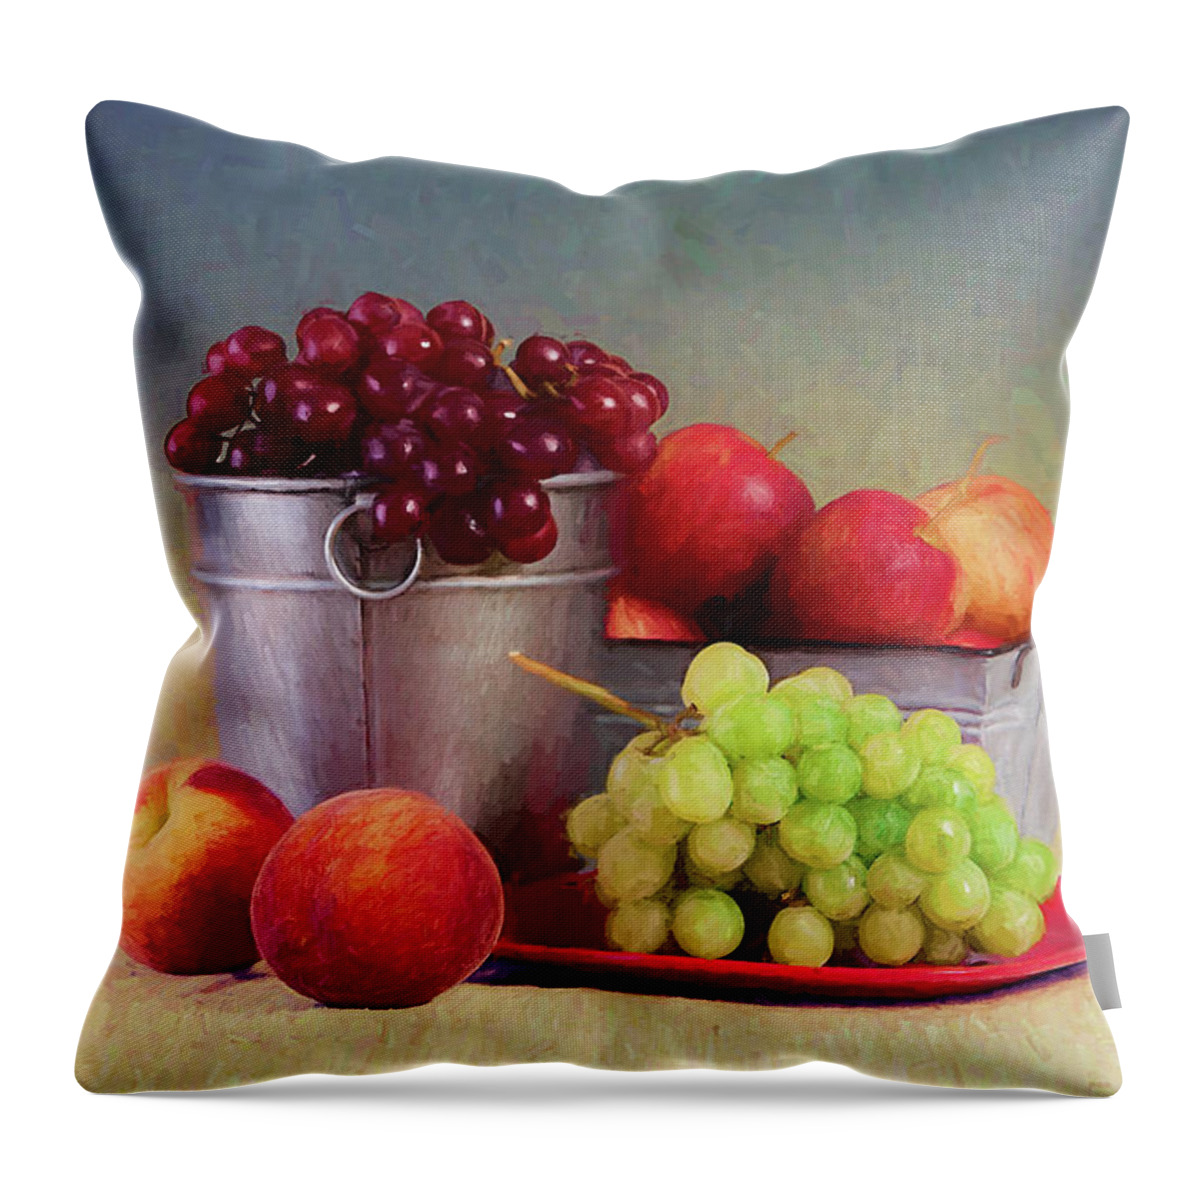 Fruit Throw Pillow featuring the photograph Fruits on Centerstage by Tom Mc Nemar